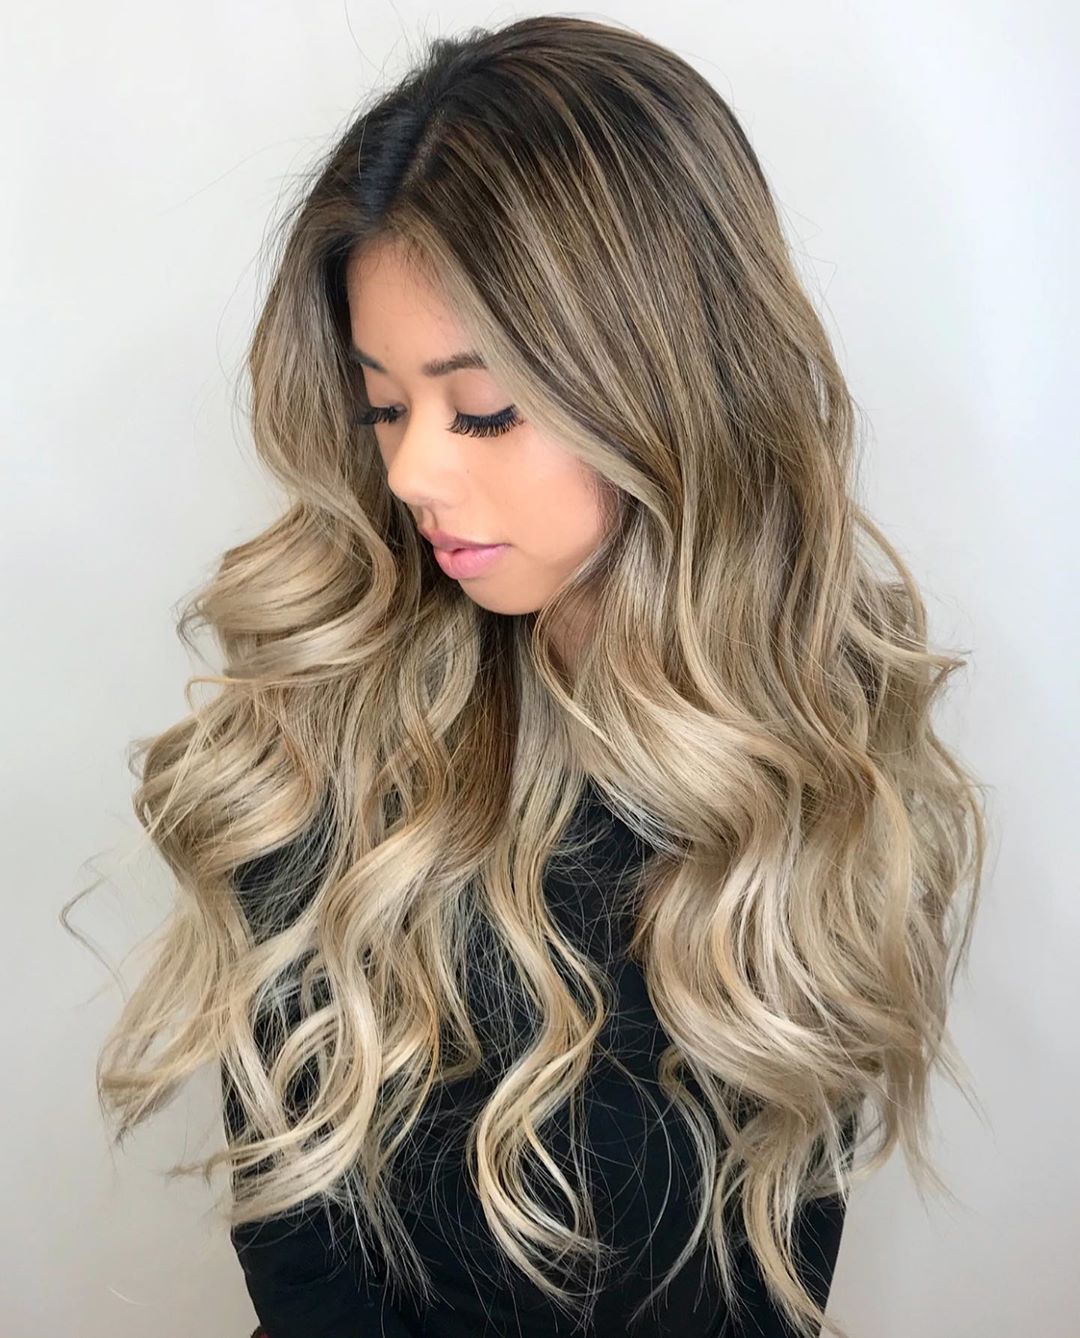 Dirty Blonde Hair Ideas We All Want To Copy